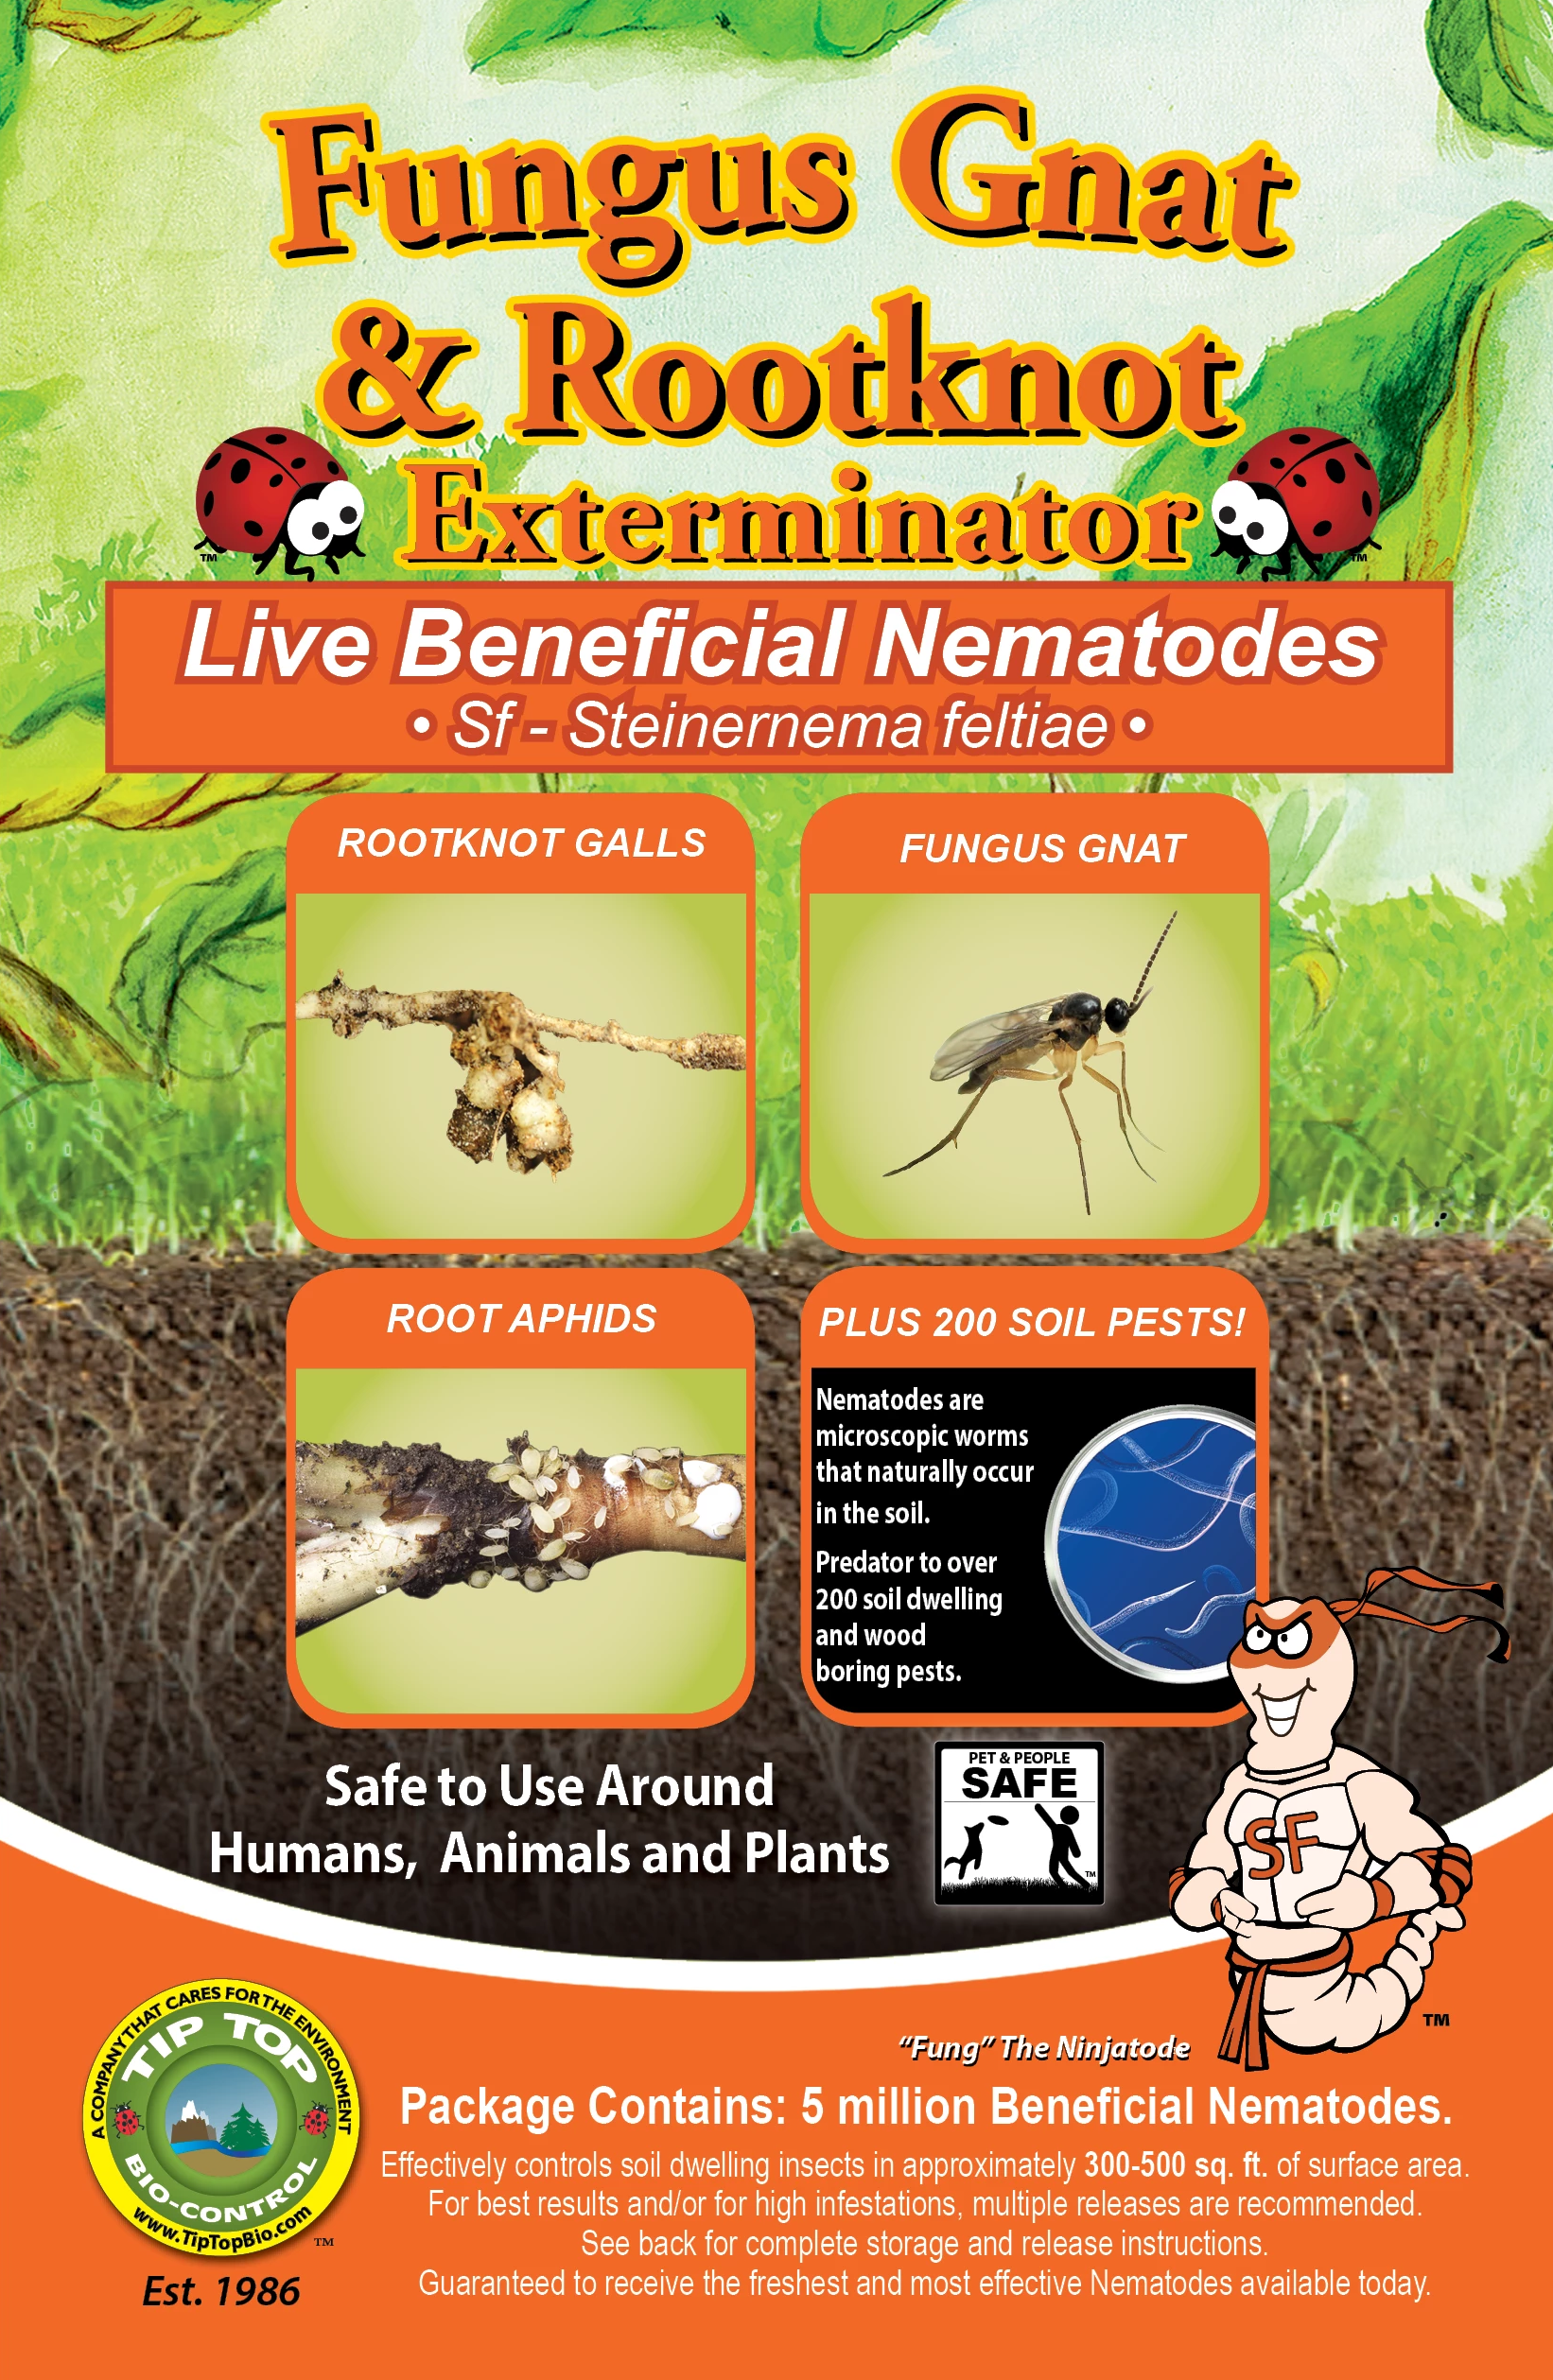 Beneficial Nematodes for Grubs and Soil-Dwelling Pests